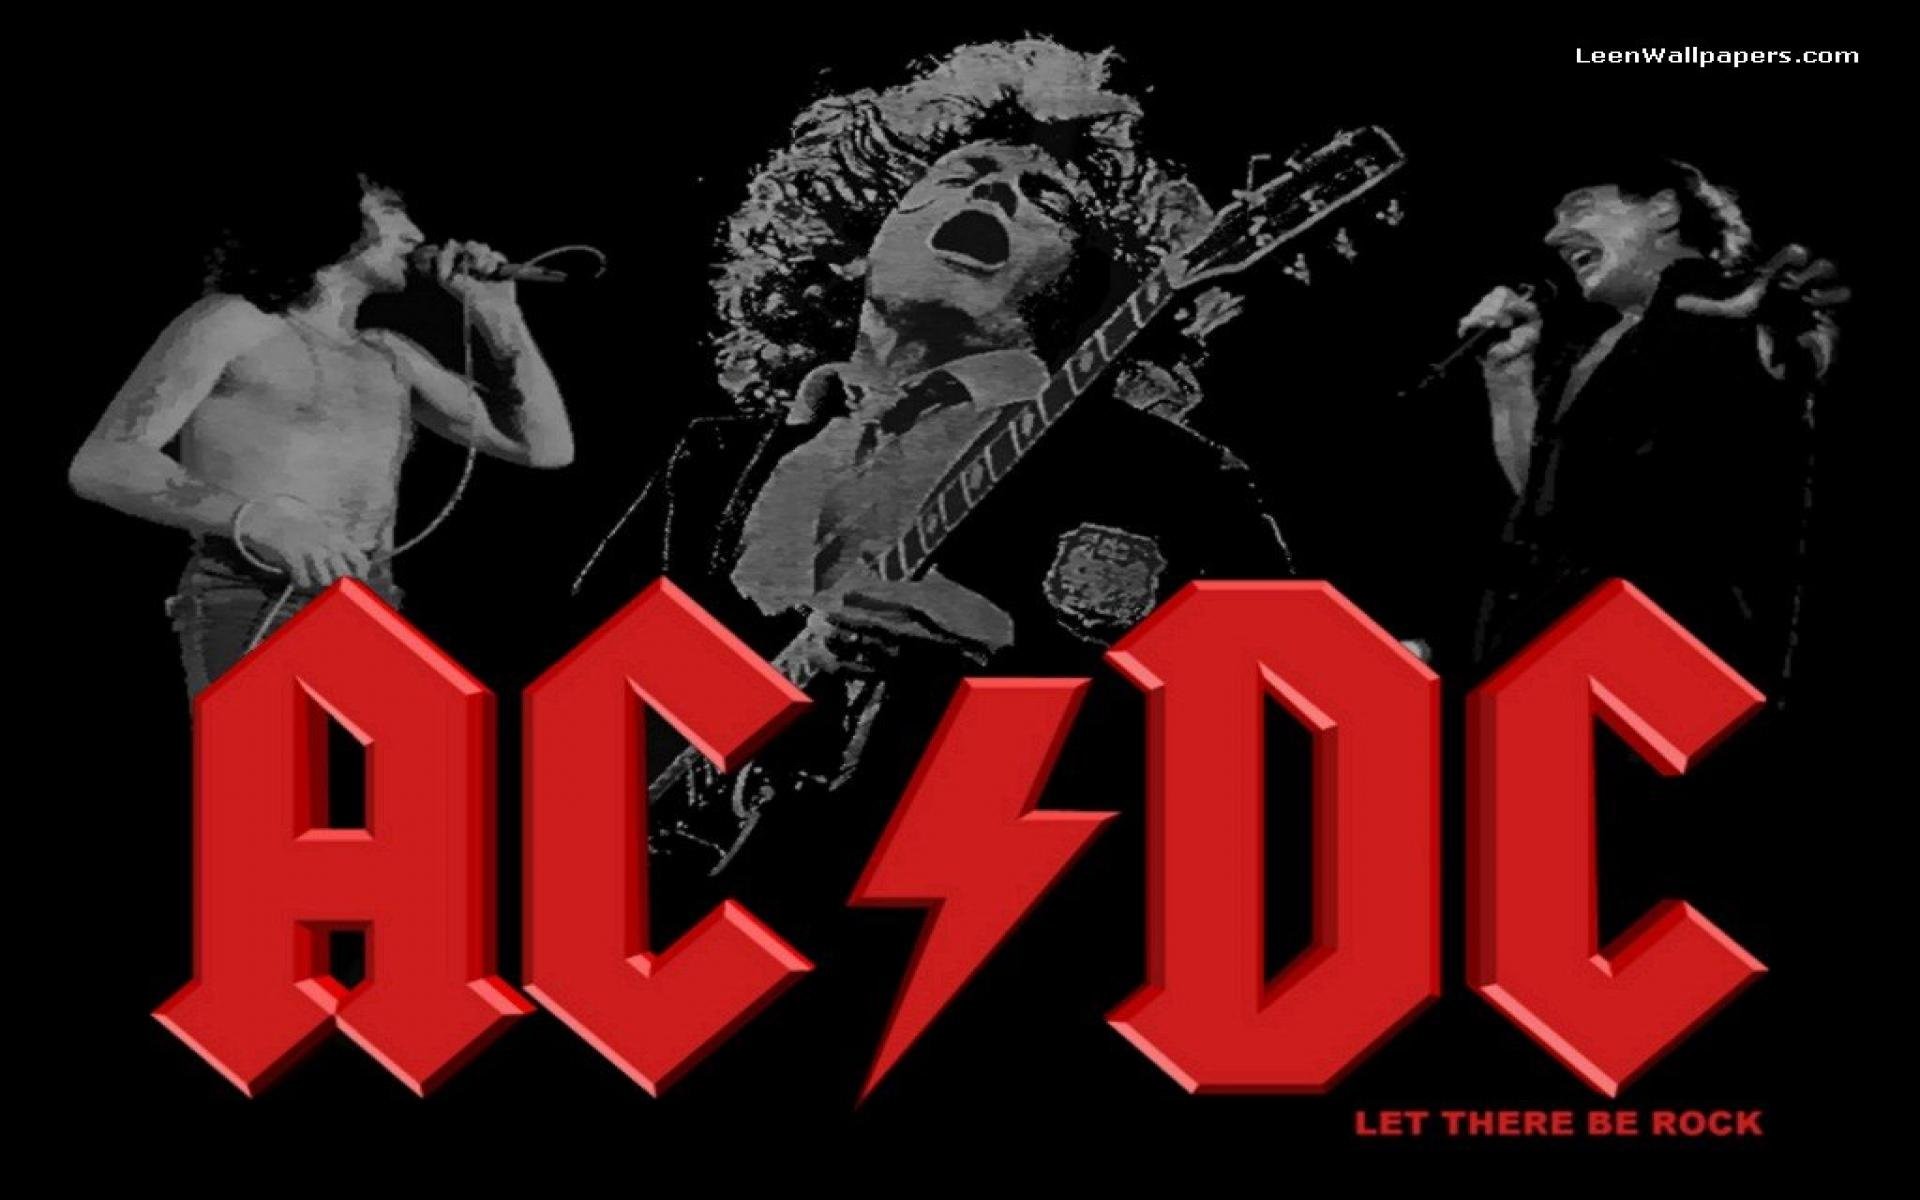 Acdc Wallpaper (68+ pictures)